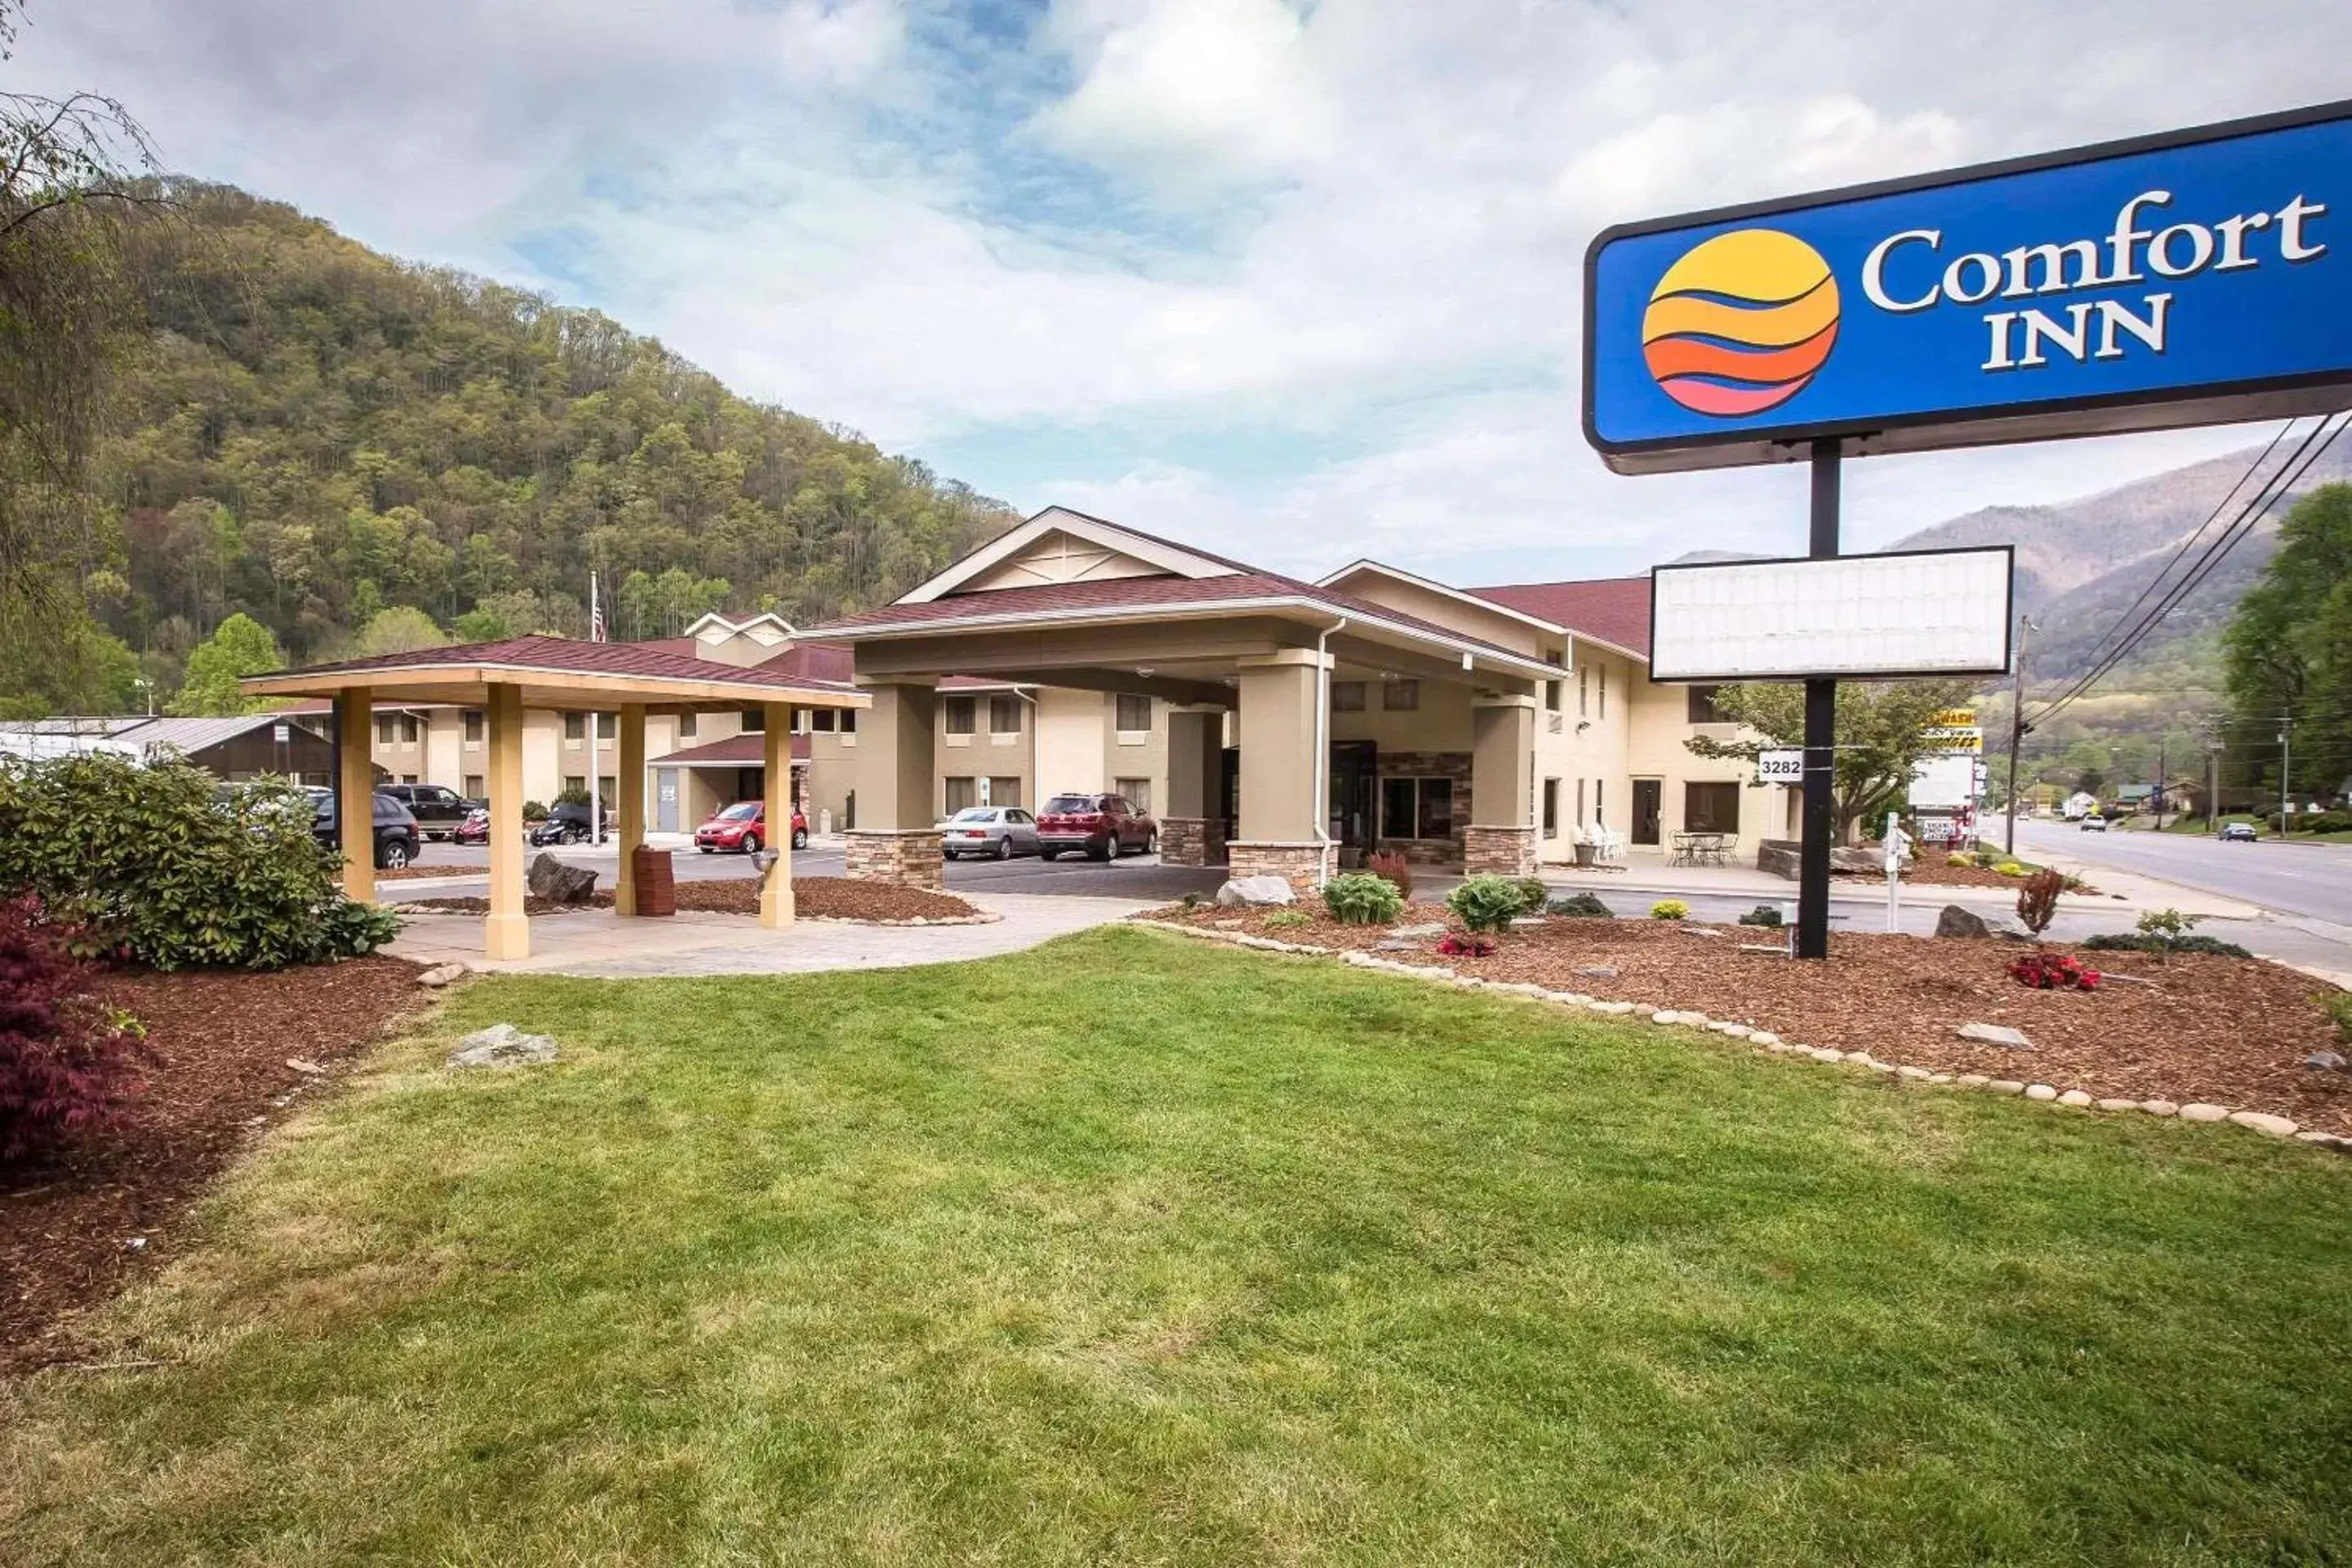 Property Building in Comfort Inn near Great Smoky Mountain National Park